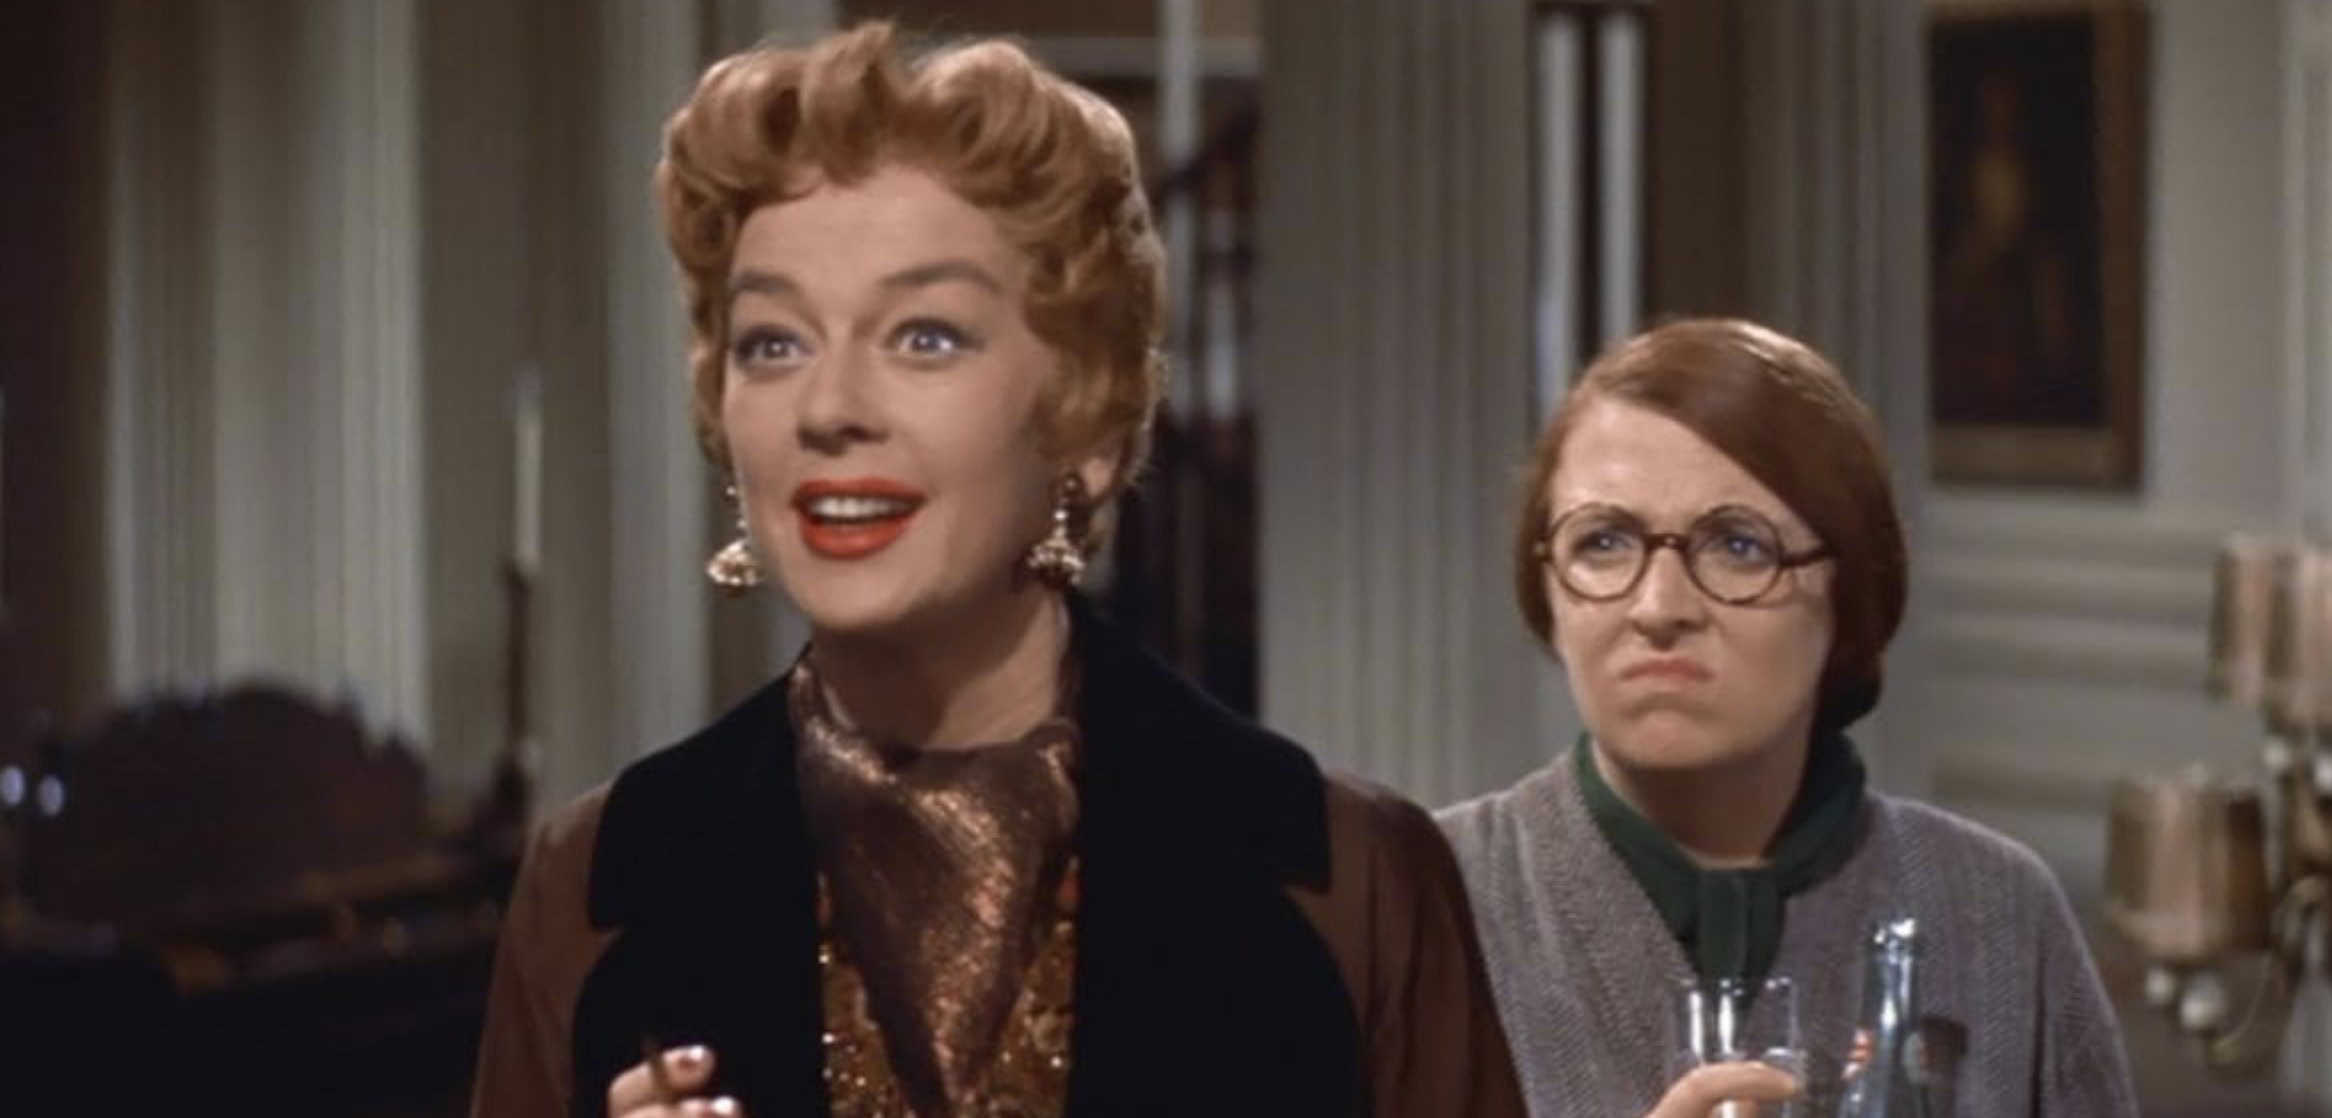 <ul> <li><strong>Director:</strong> Morton DaCosta</li> <li><strong>Cast:</strong> Rosalind Russell, Forrest Tucker, Coral Browne, Roger Smith, and Peggy Cass</li> </ul> <p>Watching "Auntie Mame" is a thrilling roller coaster. How can you not fall in love with the quirky and interesting Auntie Mame? The titular character is full of life and love. "Auntie Mame" was very popular when first released. It was released on December 27, 1968 in Technicolor. It killed it at the box office grossing about $23 million.</p>